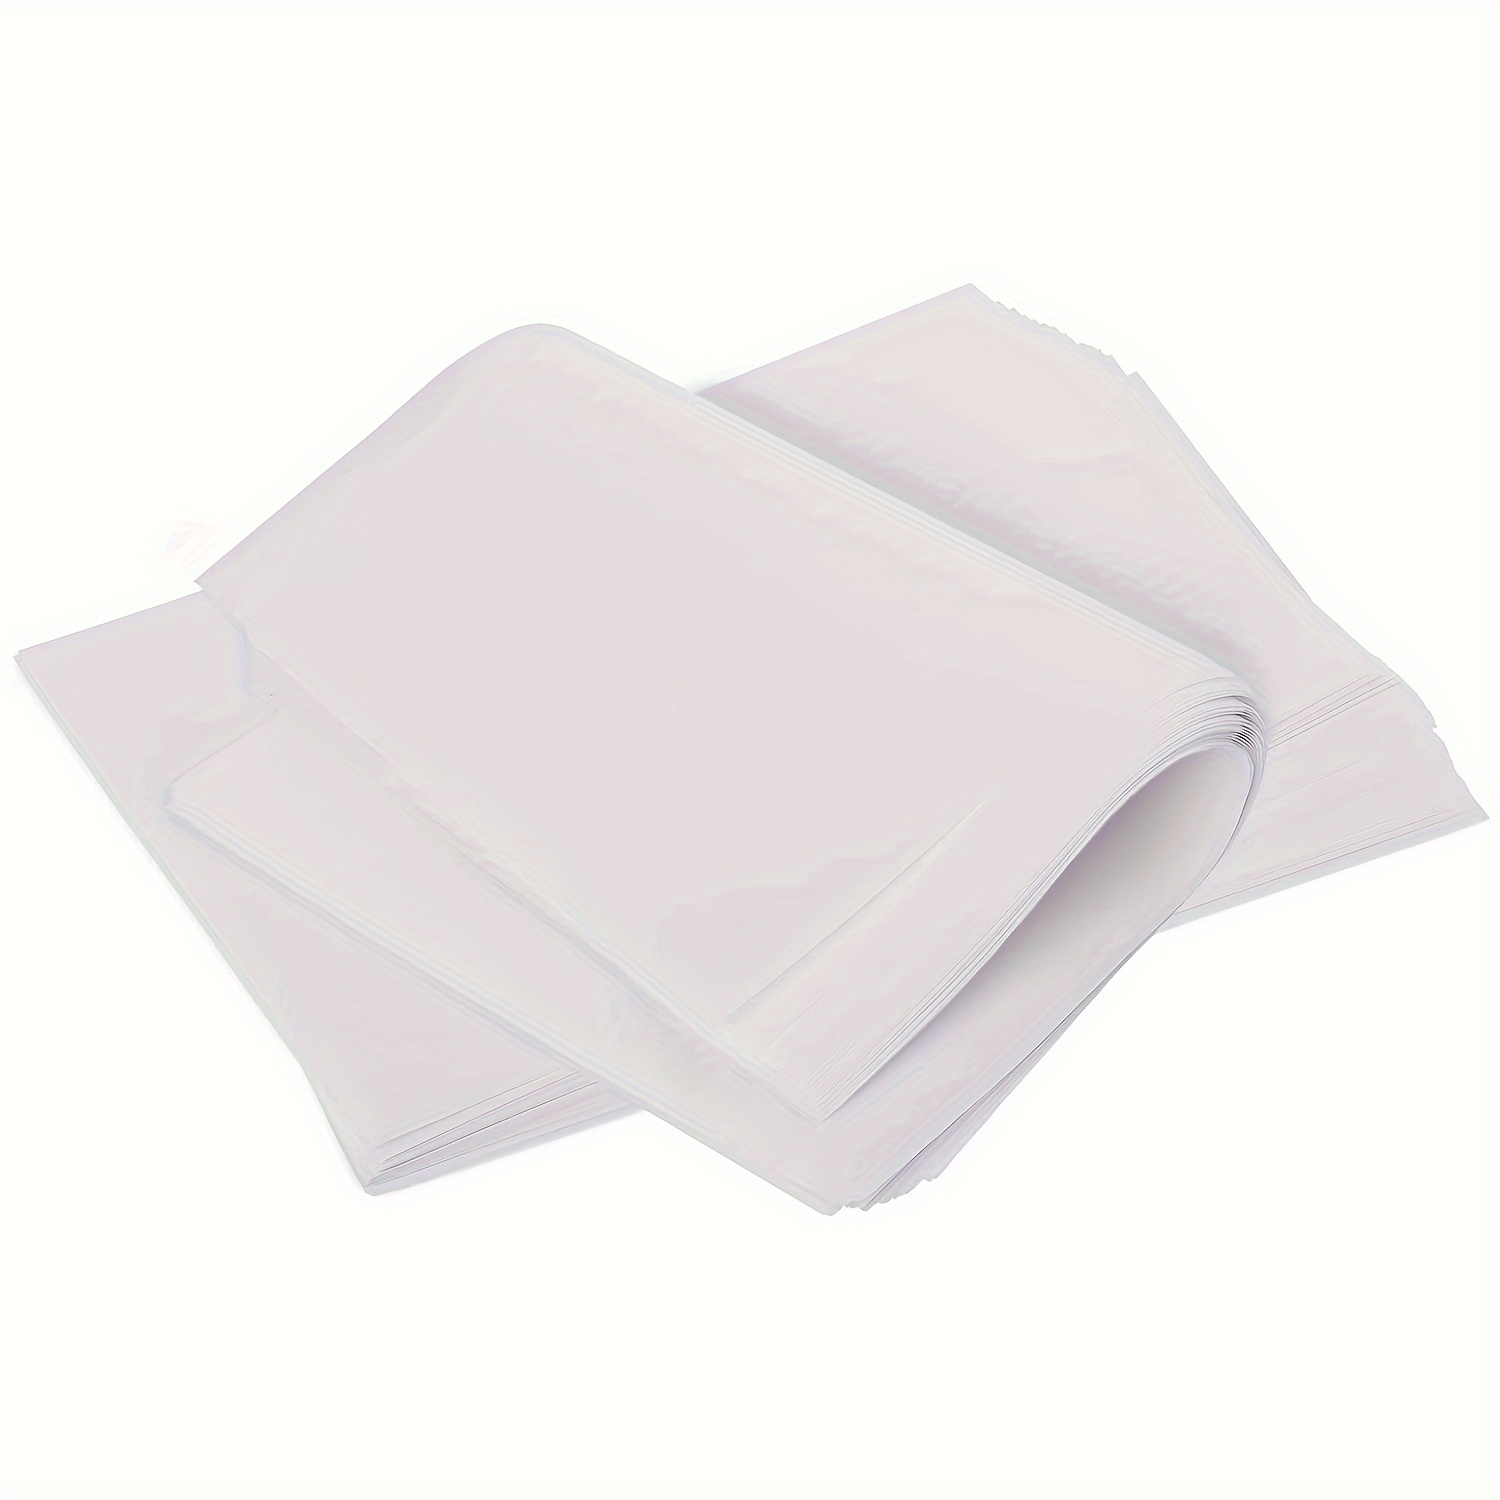 300PCS Parchment Paper Baking Sheets for Oven - 12 x 16 Inches Non-Stick  Precut Baking Parchment Paper Sheets for Baking, Cooking, Grilling, Air  Fryer